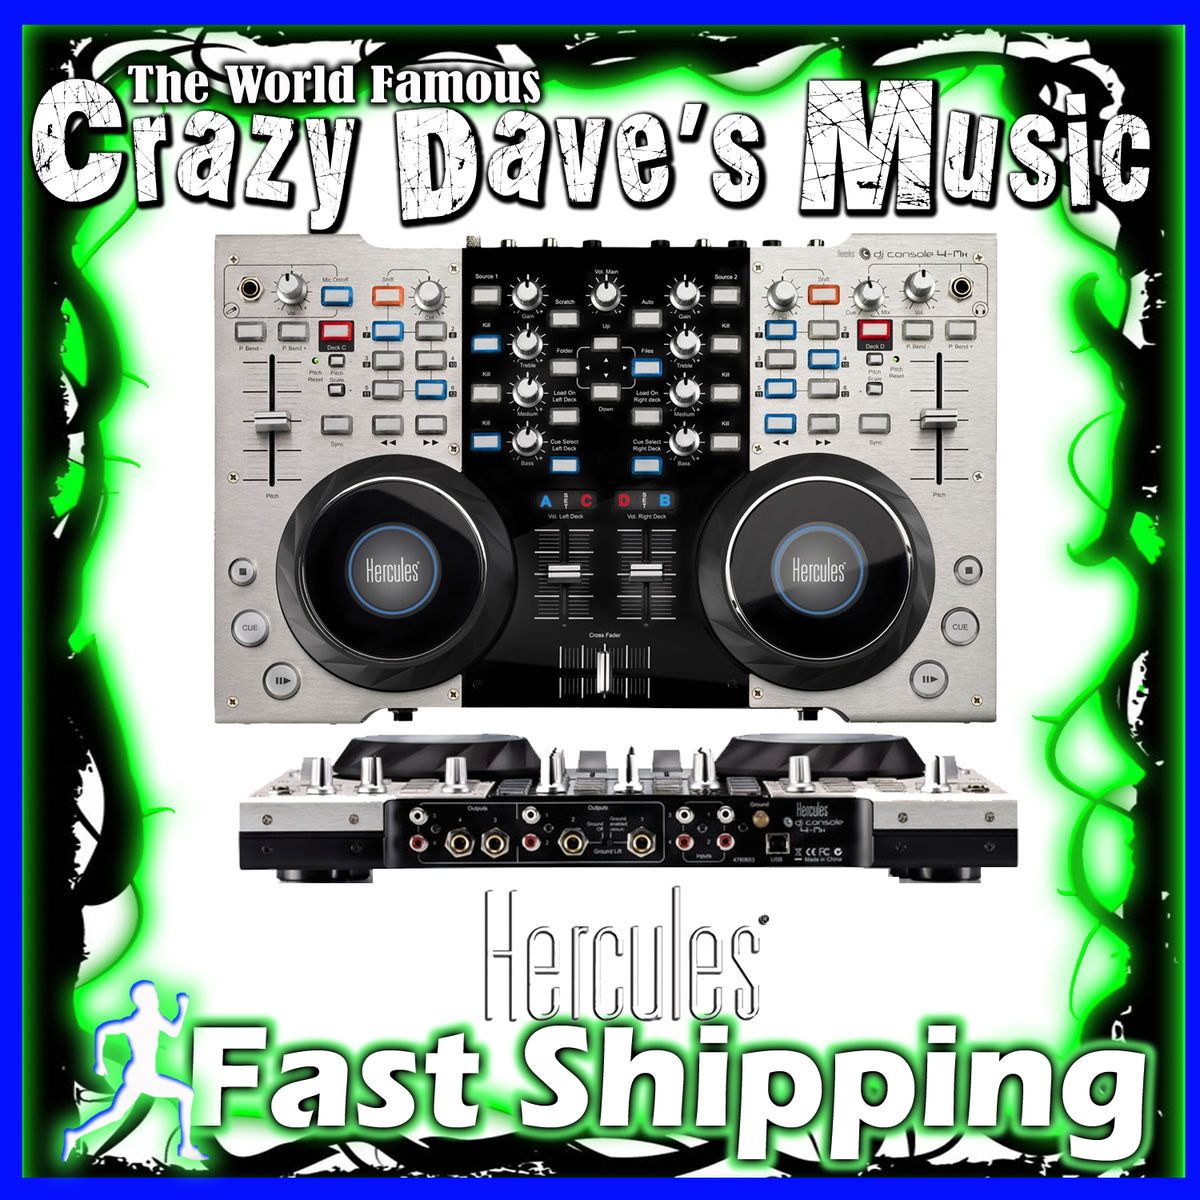 Hercules DJ Console 4 MX Professional mix station for mobile & club